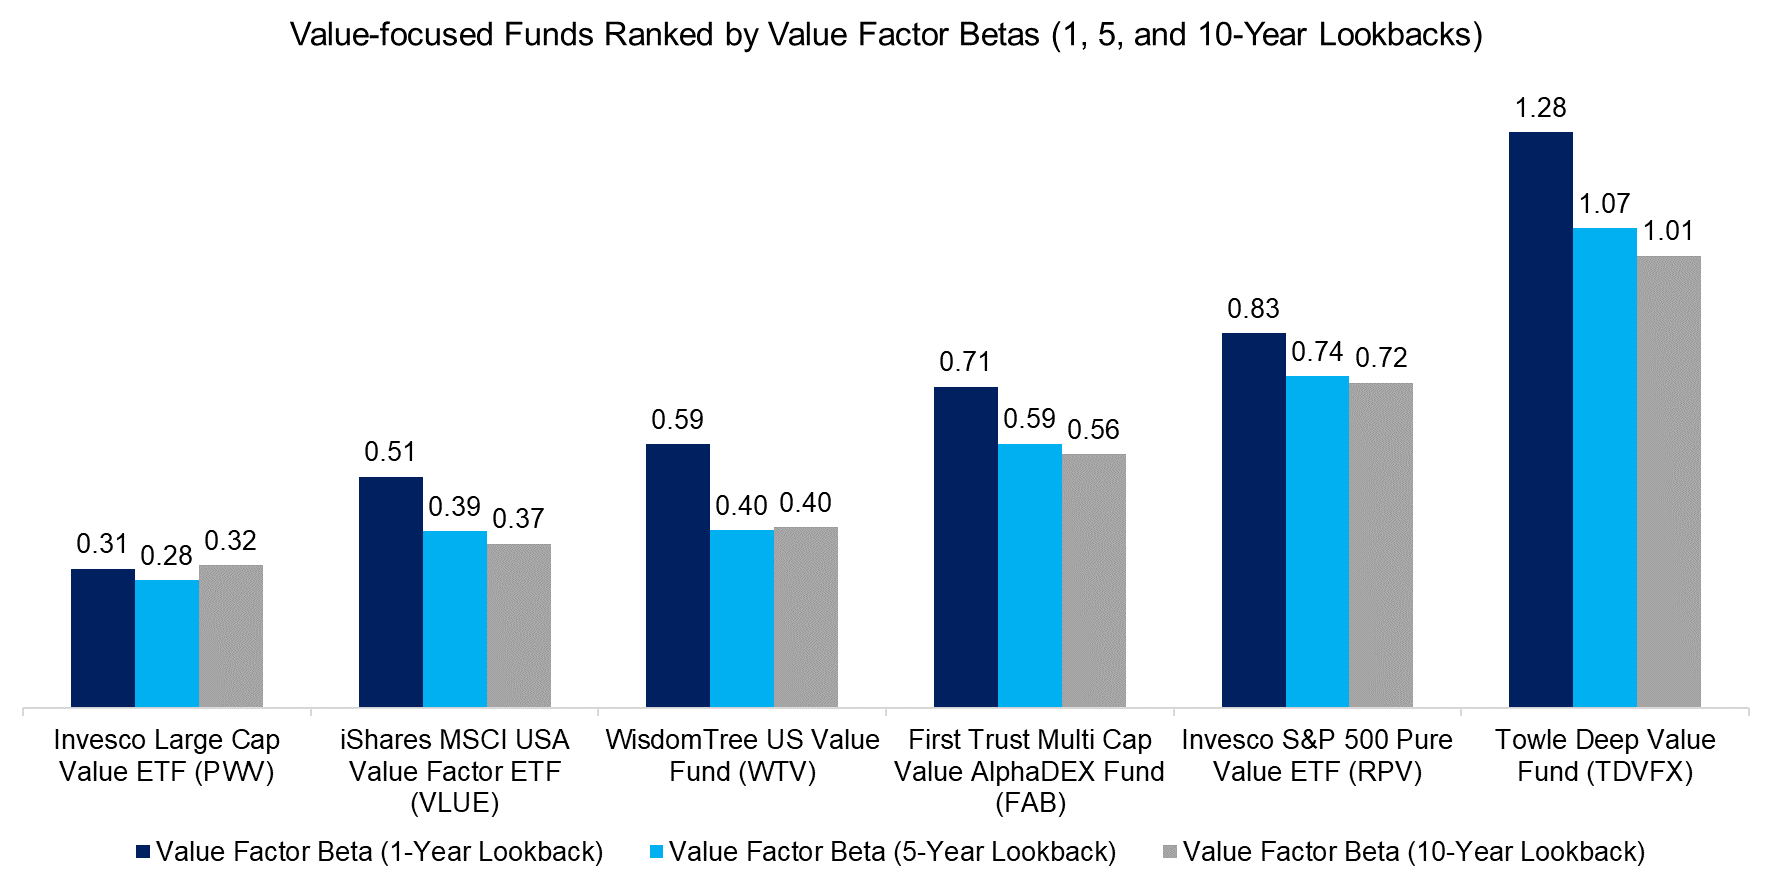 Value-focused Funds Ranked by Value Factor Betas (1, 5, and 10-Year Lookbacks)